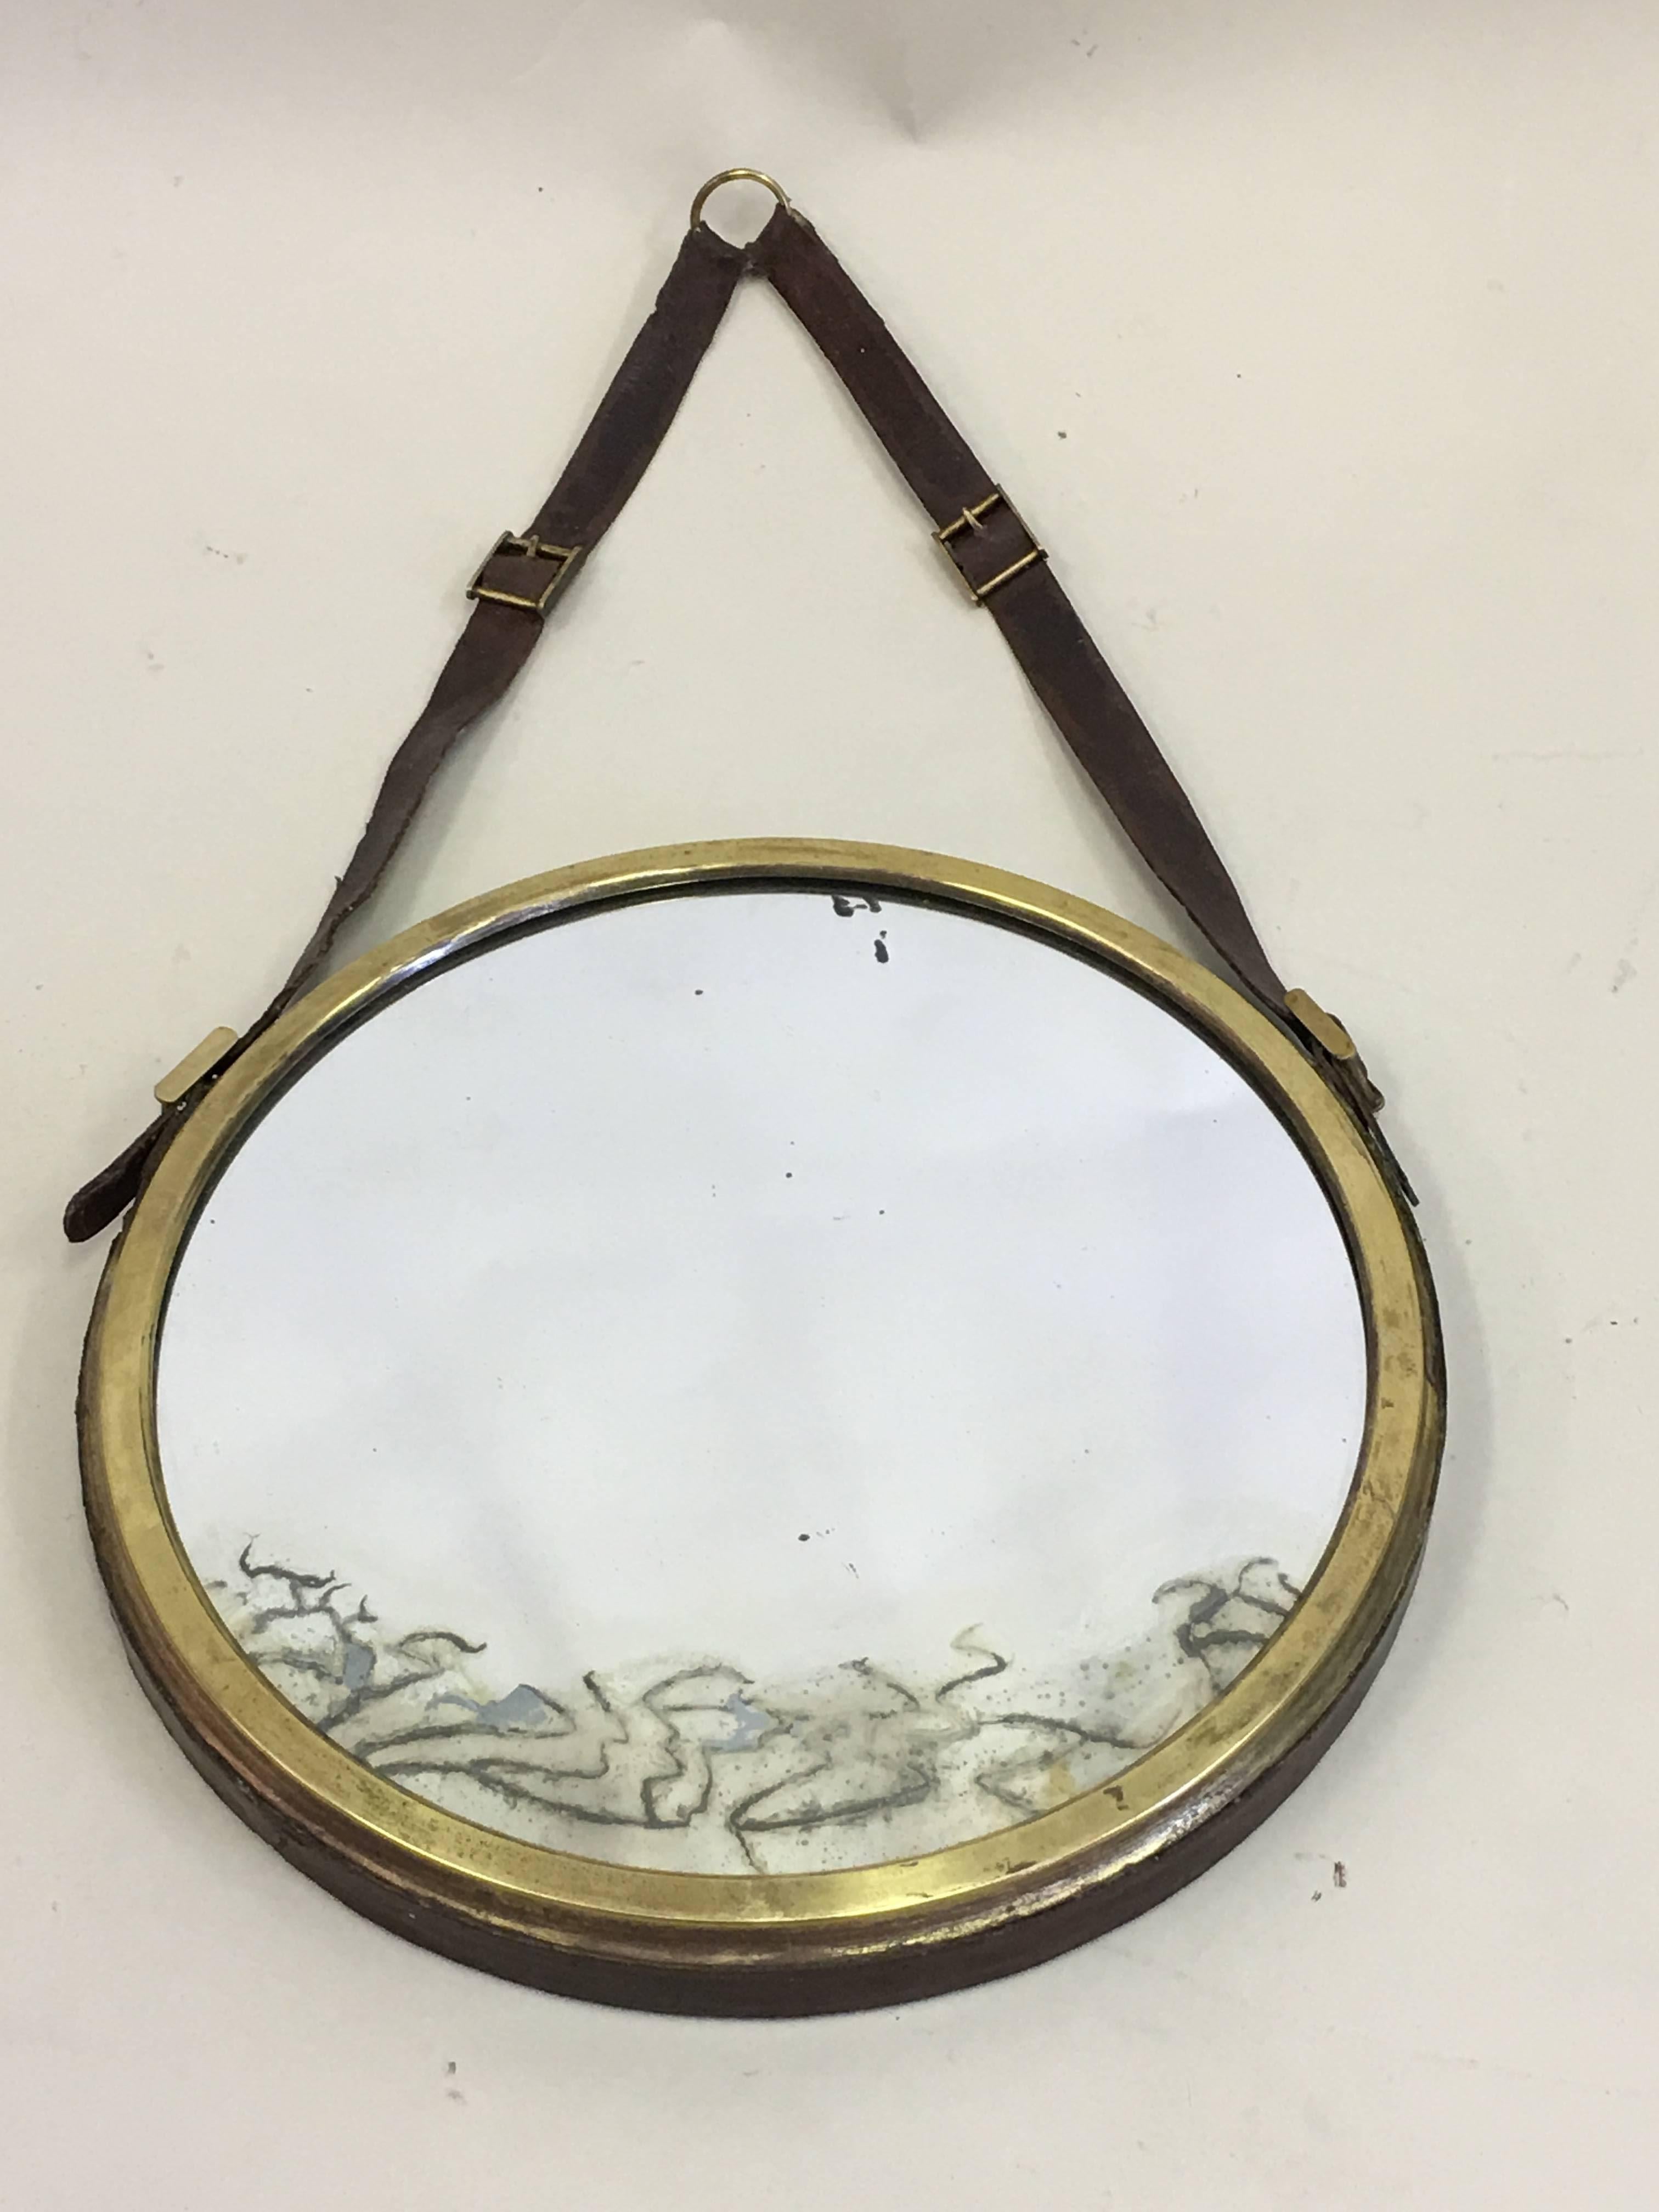 French Mid-Century Modern neoclassical leather wrapped mirror in the style of Jacques Adnet. The piece is round / circular with the frame in brass that has been covered in leather and suspended via leather straps.